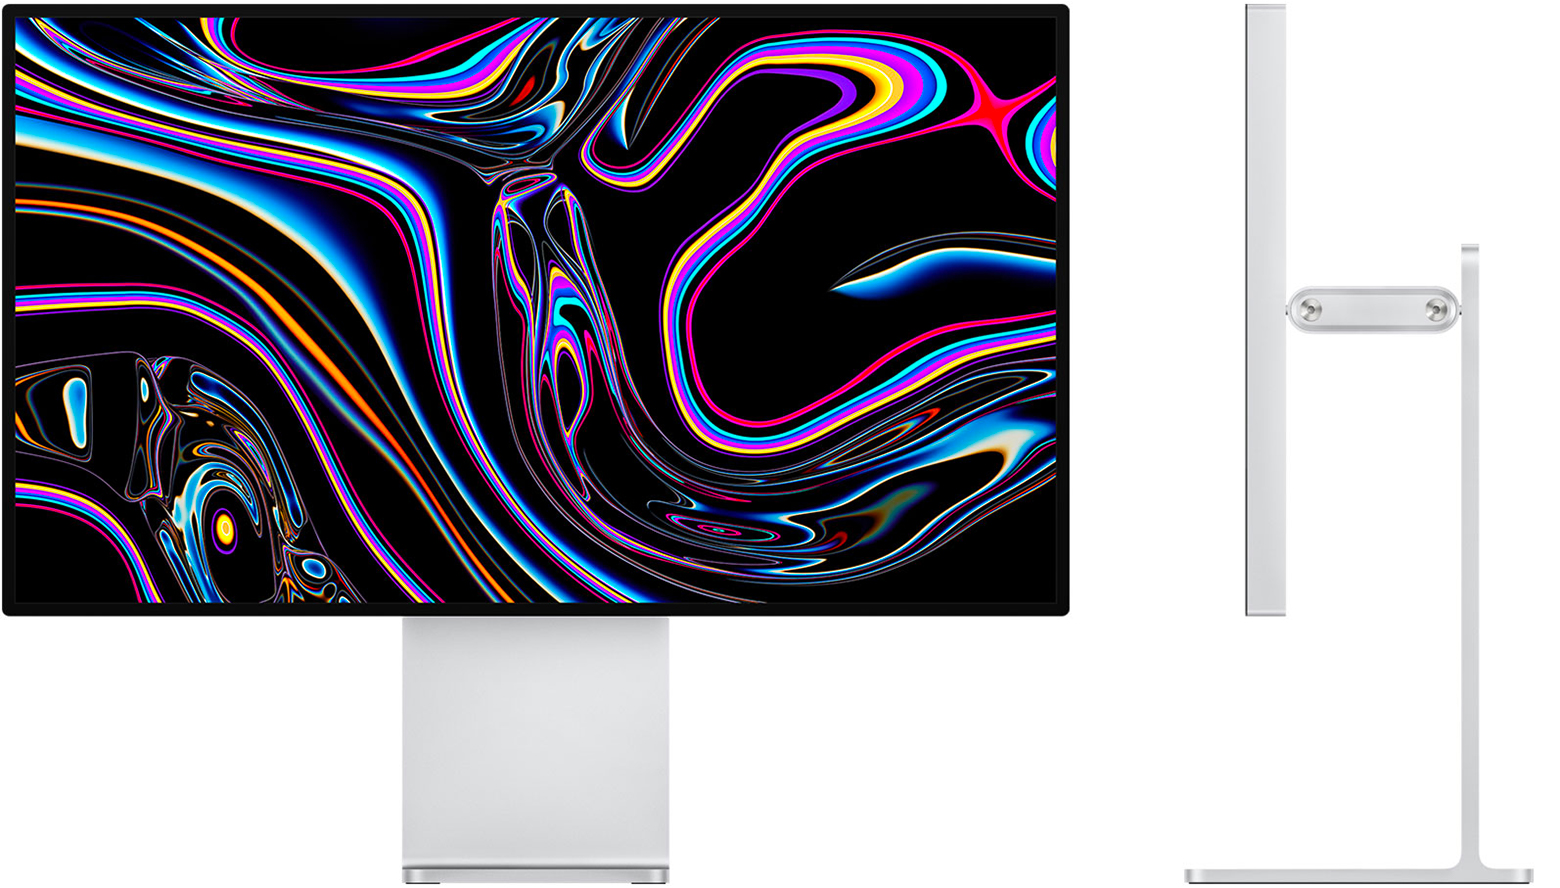 Set up and use Apple Pro Display XDR - Apple Support